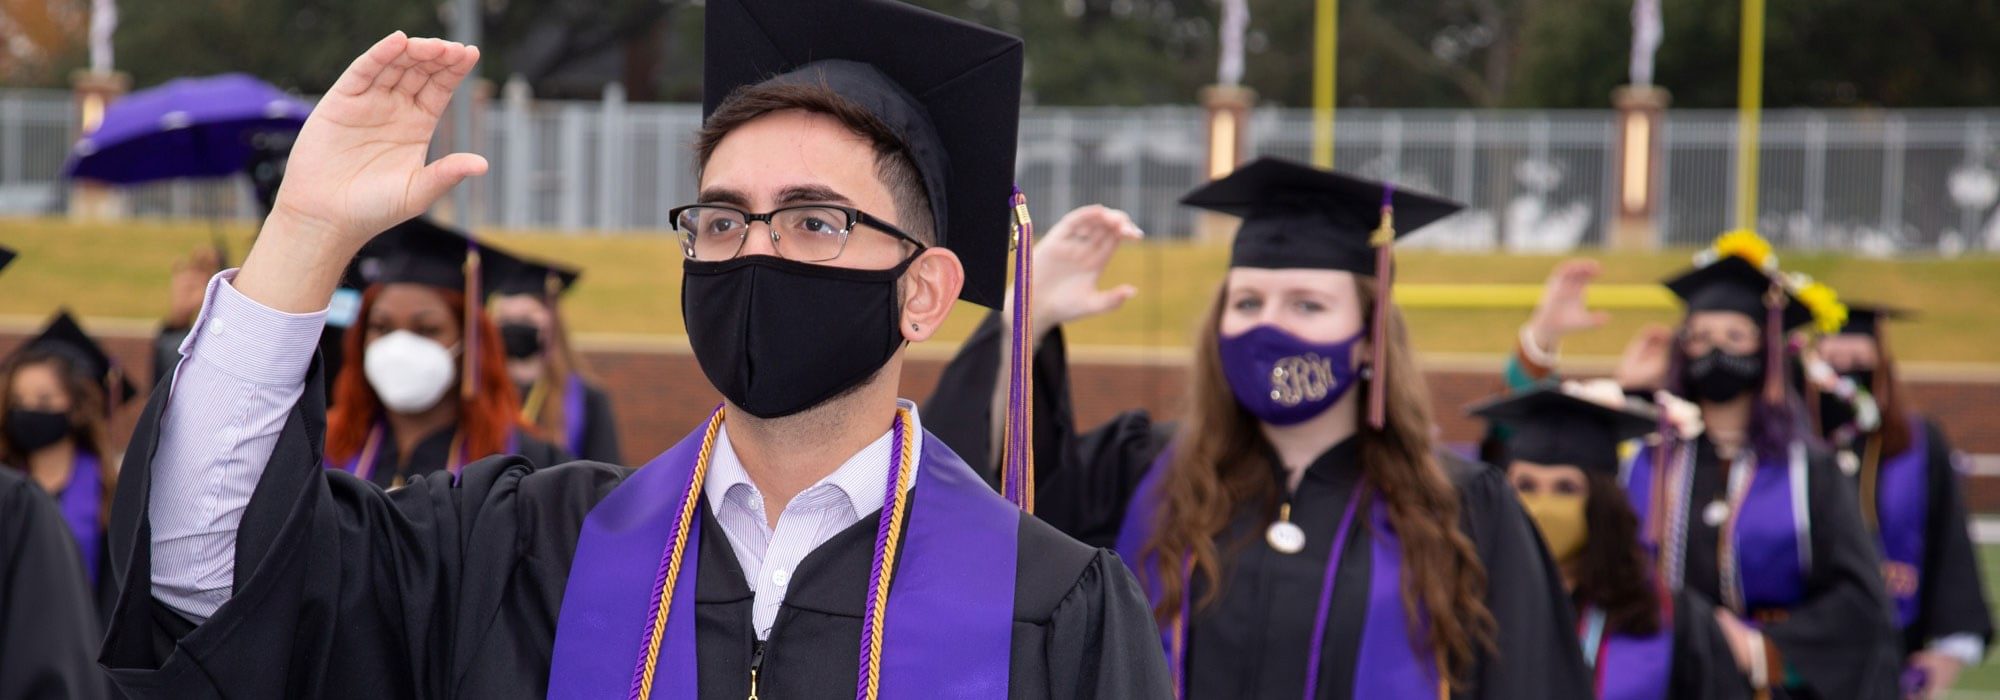 UMHB Fall Commencement 2020